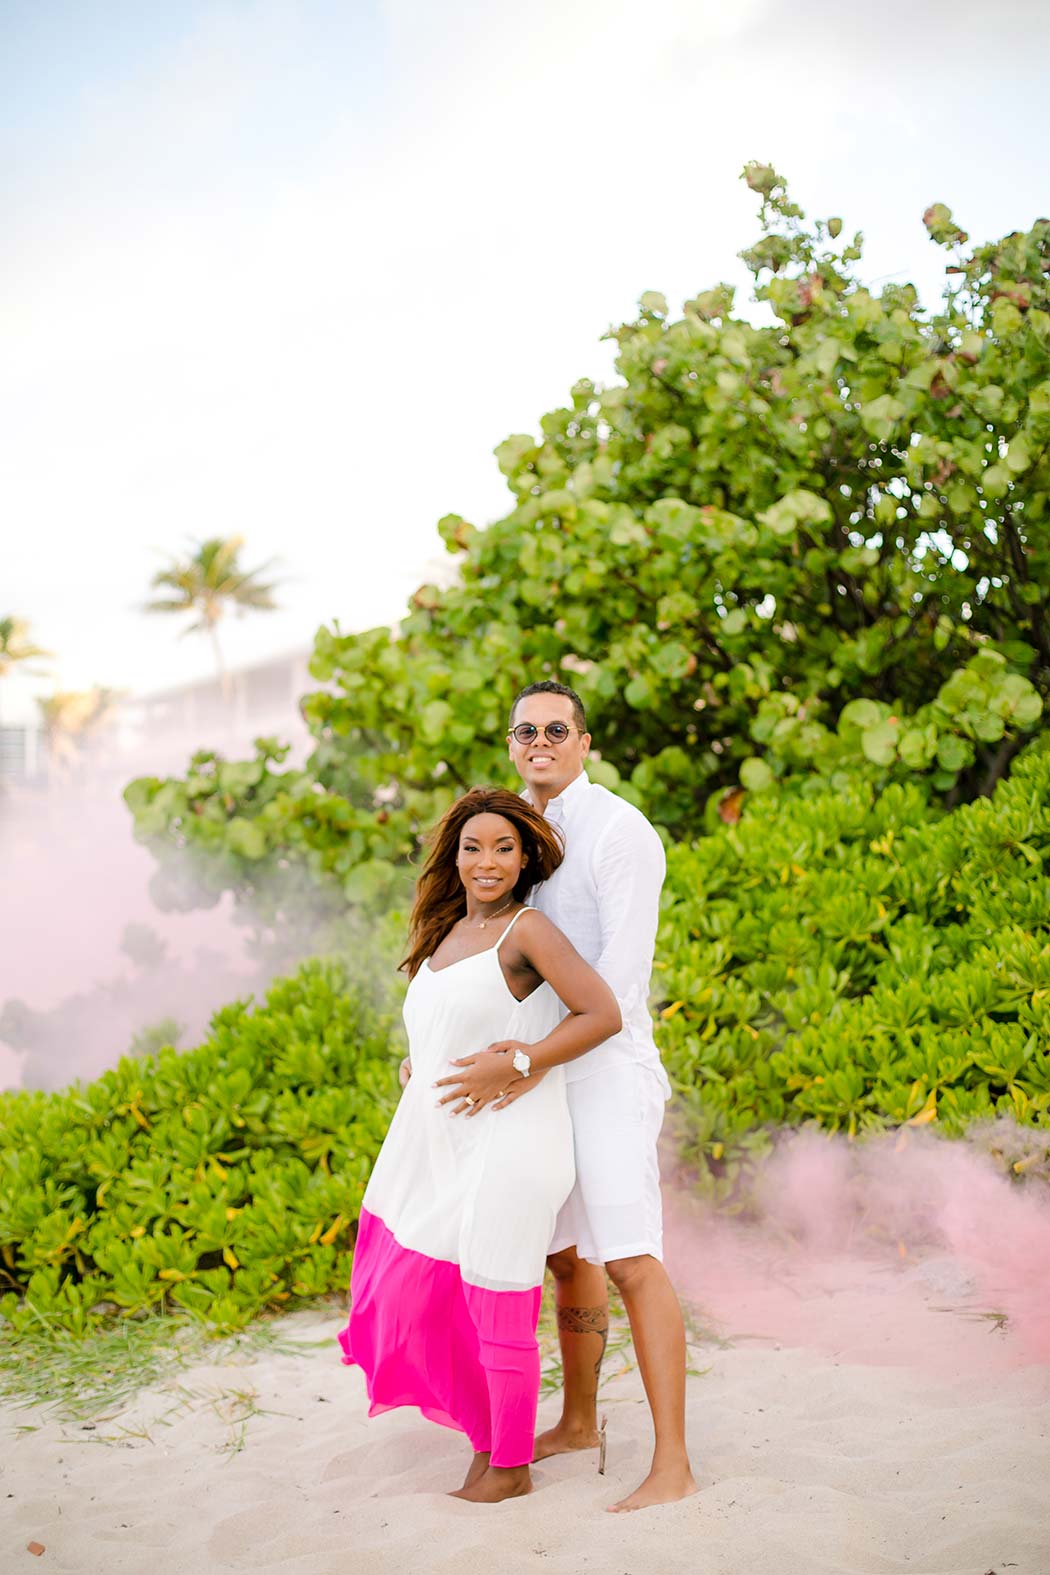 pink smoke bomb gender reveal on beach | fort lauderdale maternity photographer